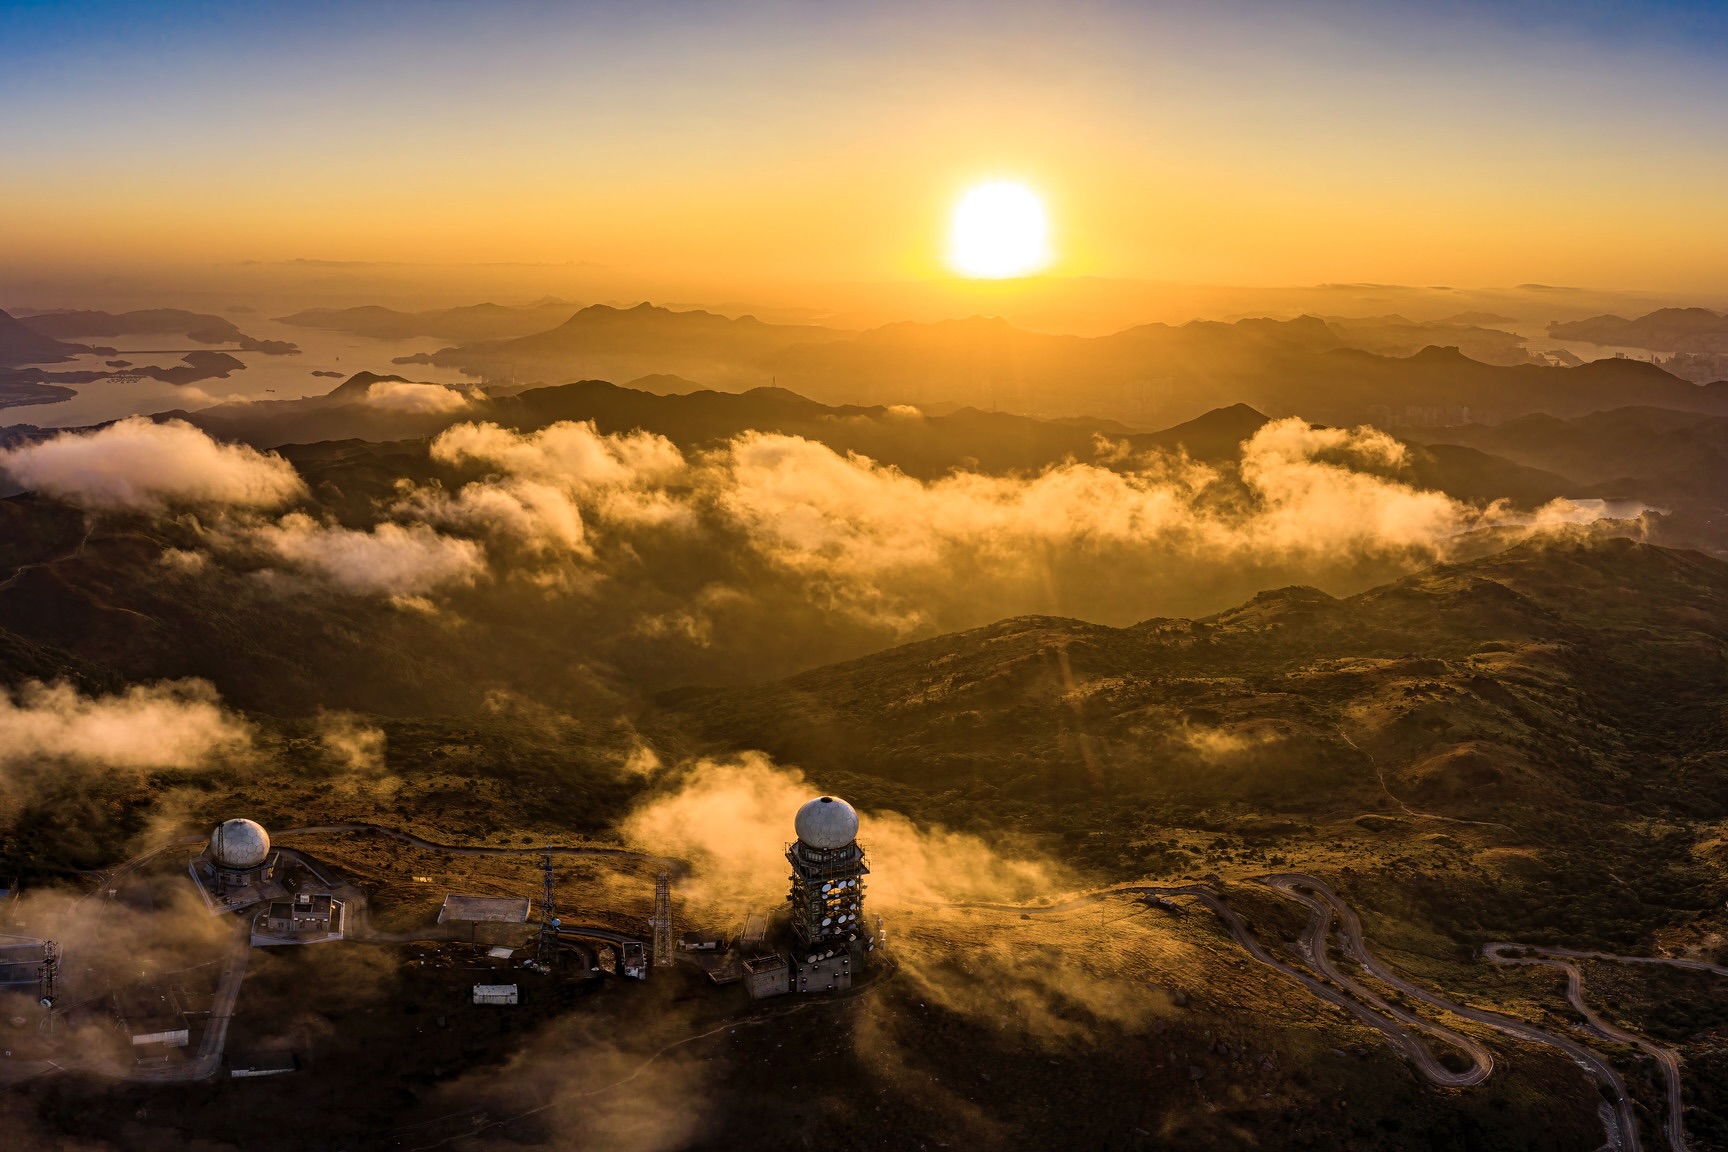 An overhead view of the Hong Kong Observatory's weather radar station in Tai Mo Shan Country Park at sunrise. The rolling hills are blocked by low-lying clouds.